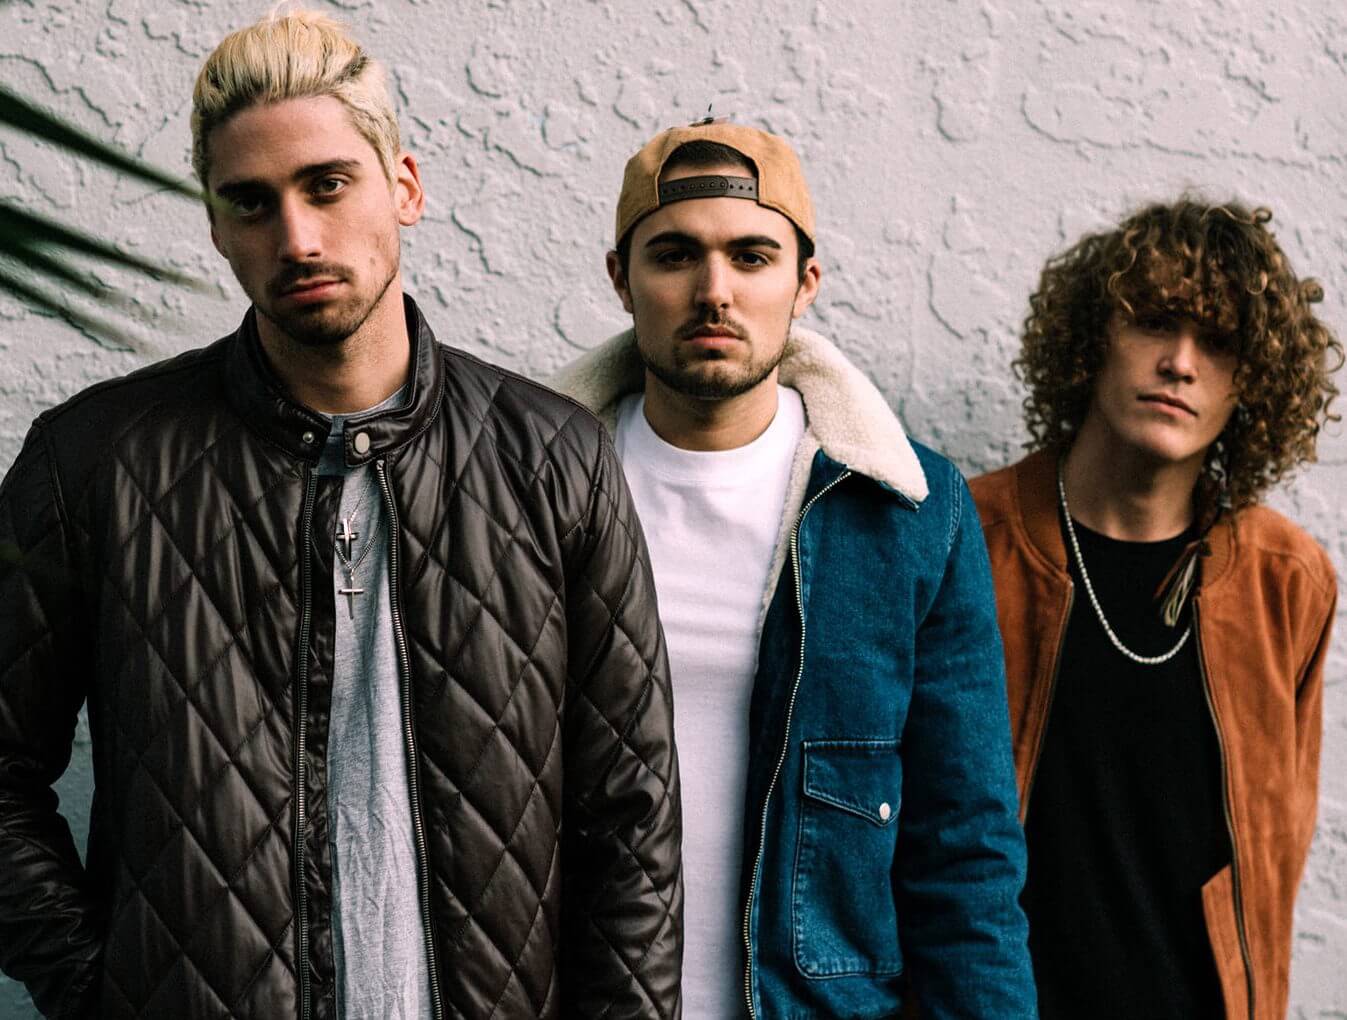 [GUEST LIST] Cheat Codes picks their favorite songs of 2016